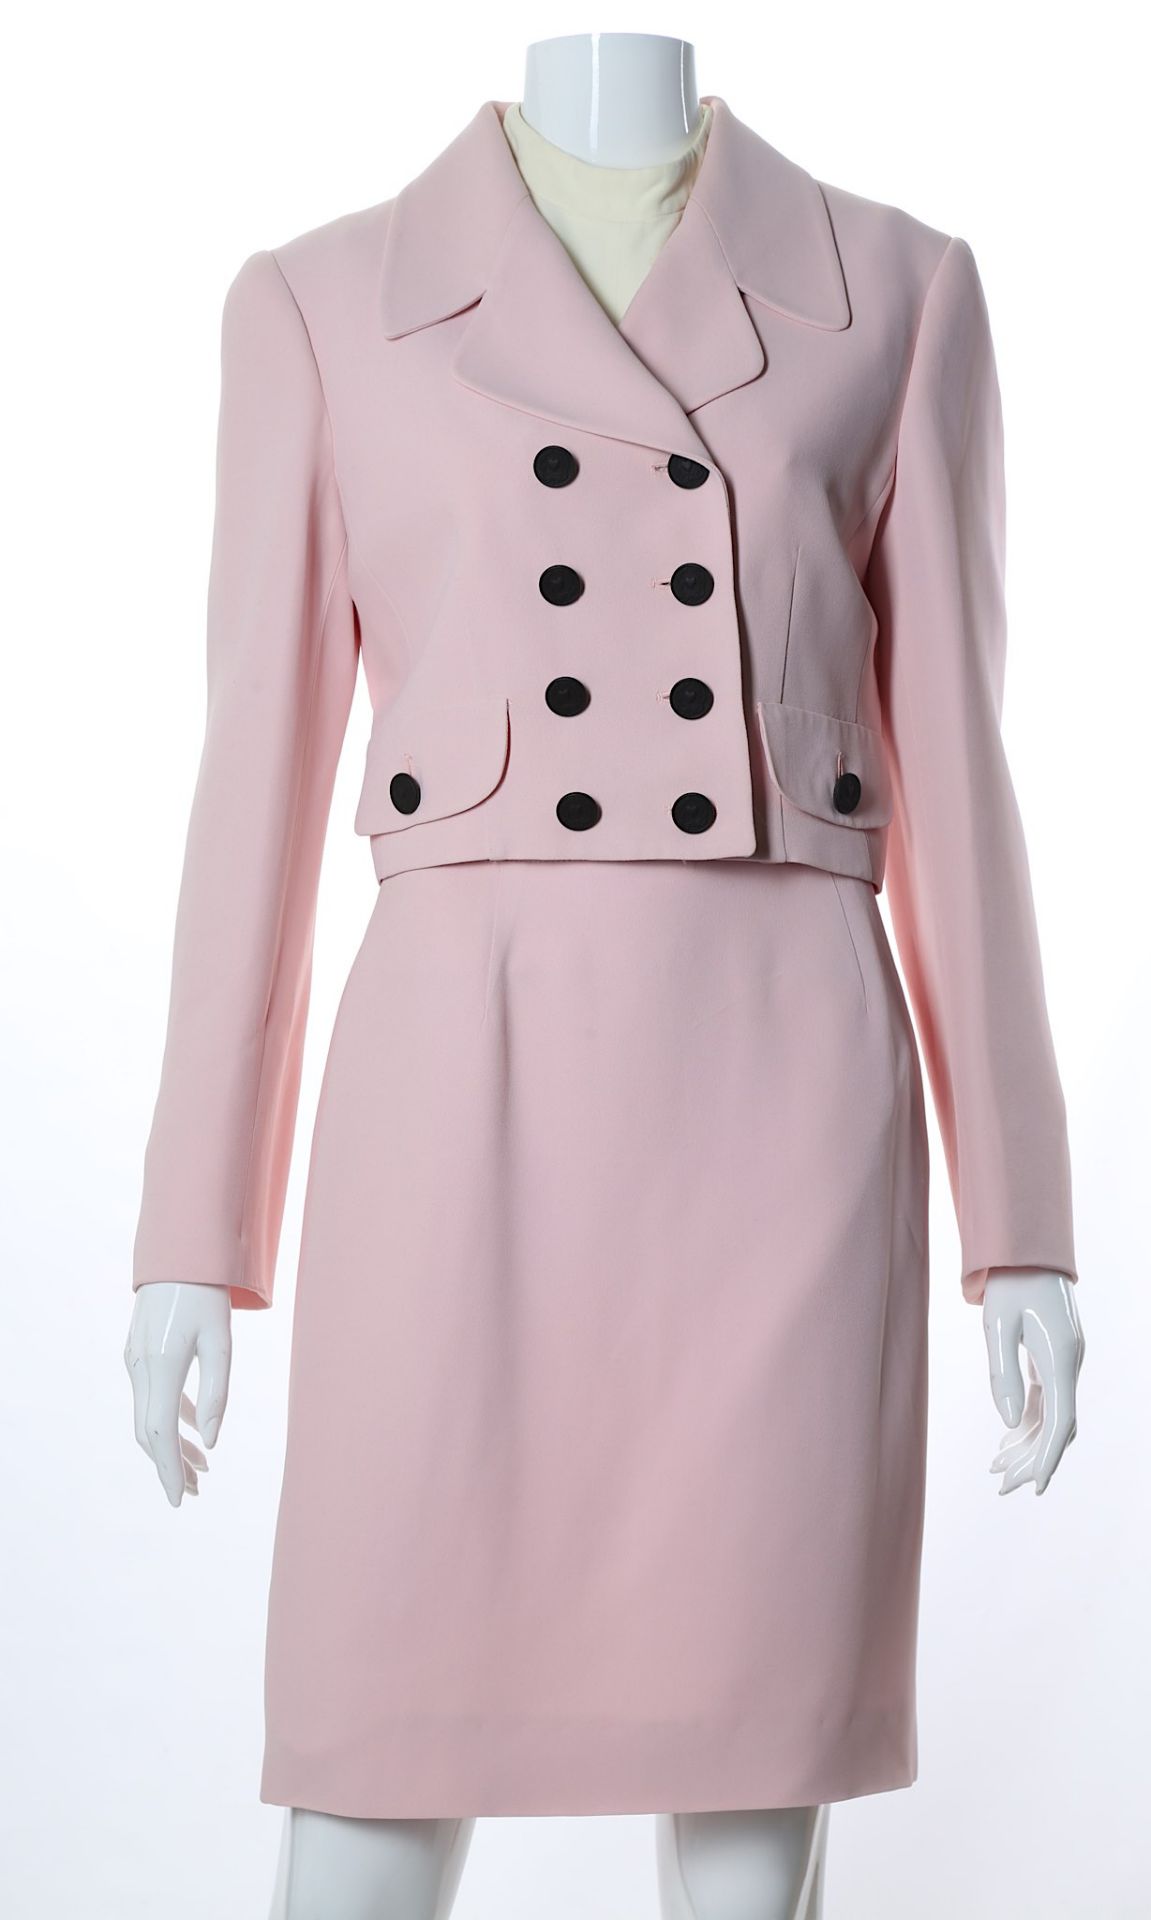 Moschino Cheap and Chic Pink Skirt Suit, 1990s, wi - Bild 2 aus 10